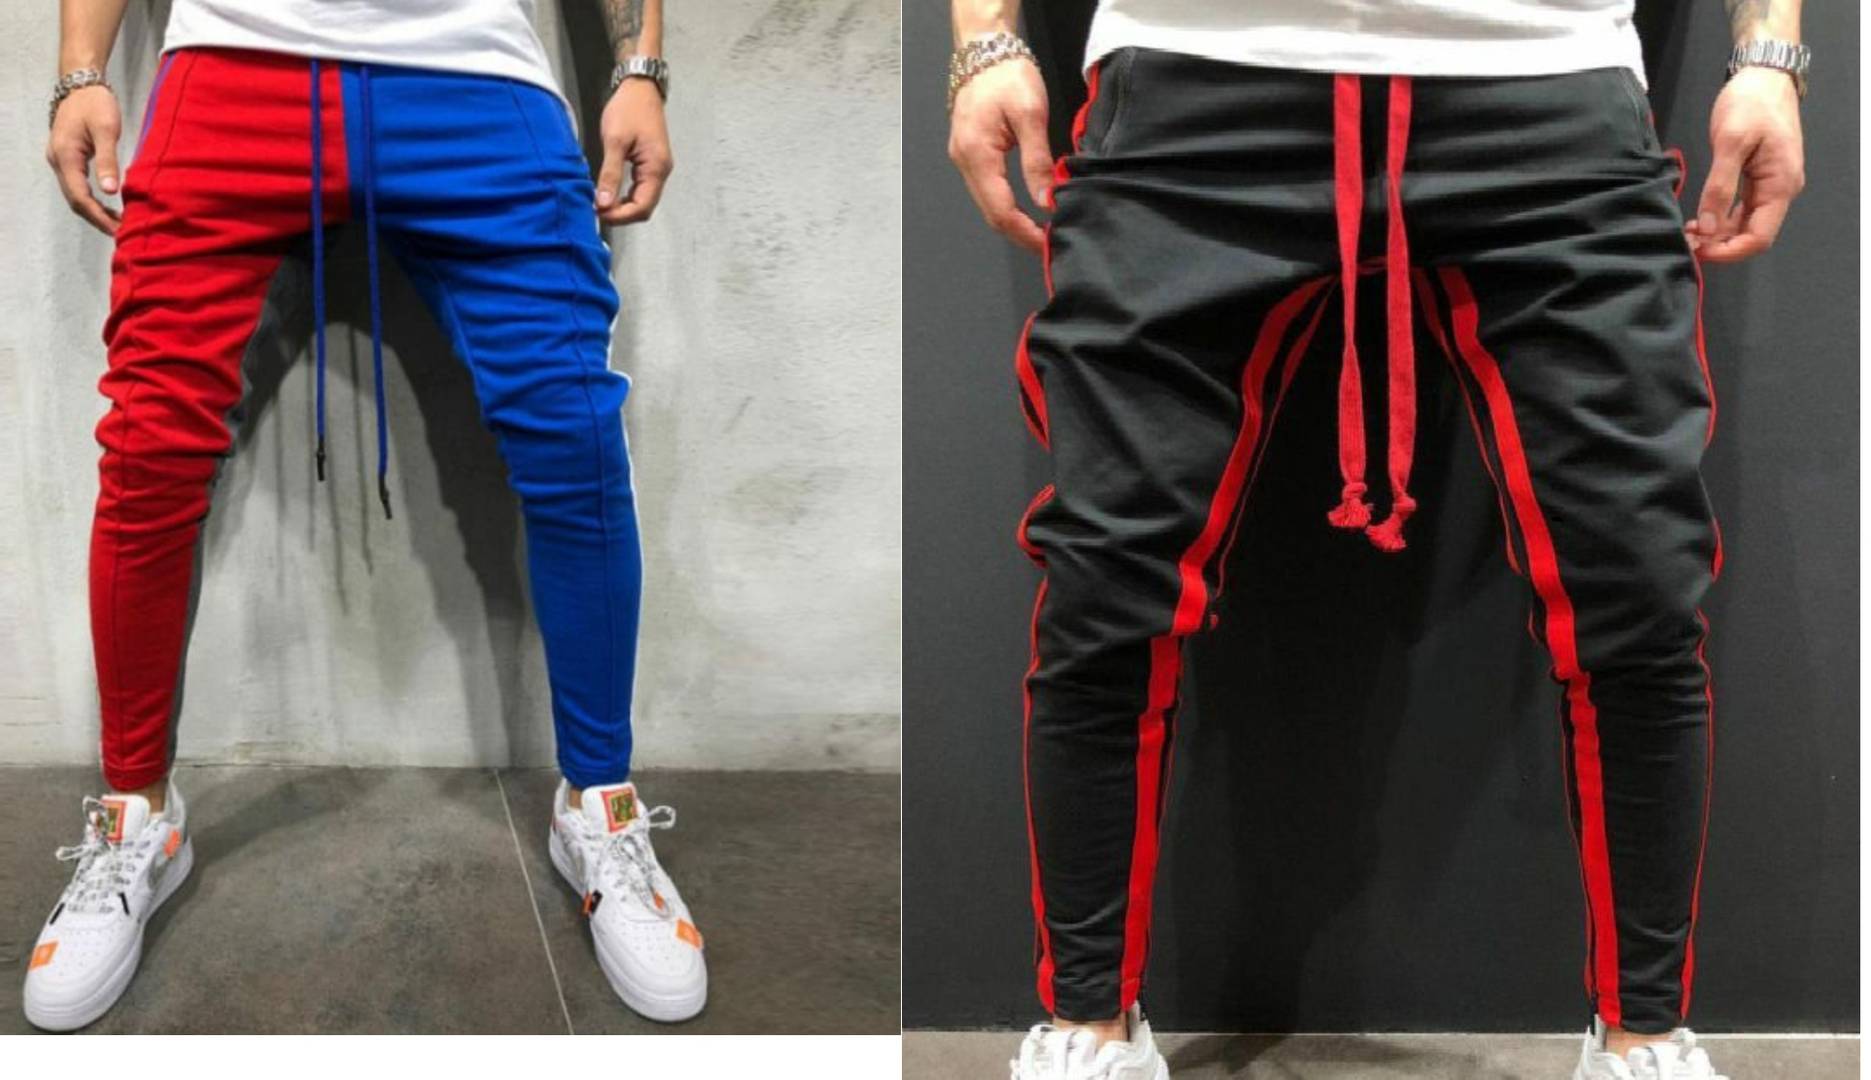 Solid Grey & White Men Track Pants Combo Pack | Faricon